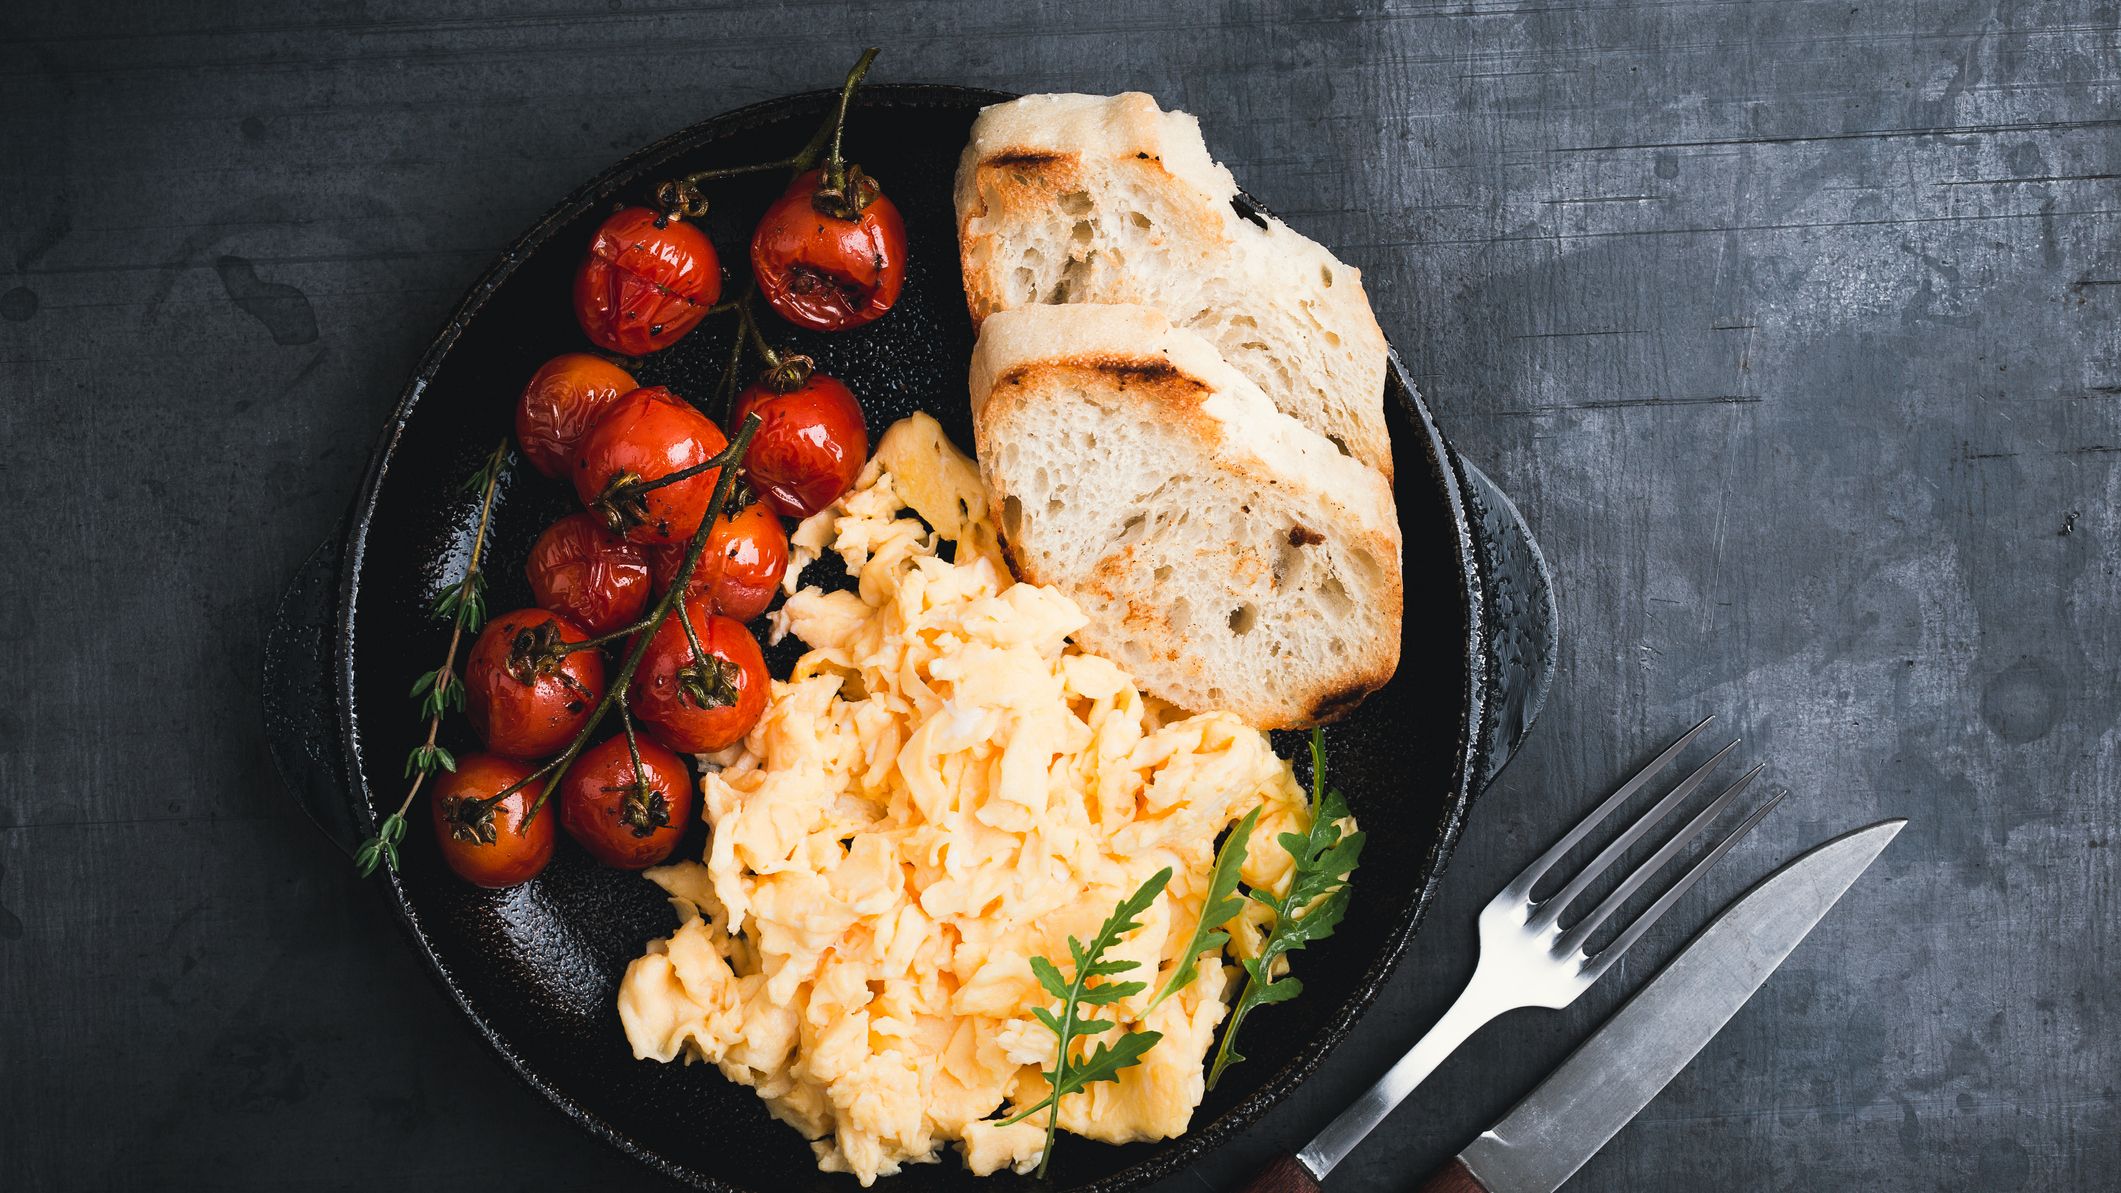 How to Make Perfect Griddle Scrambled Eggs Every Time